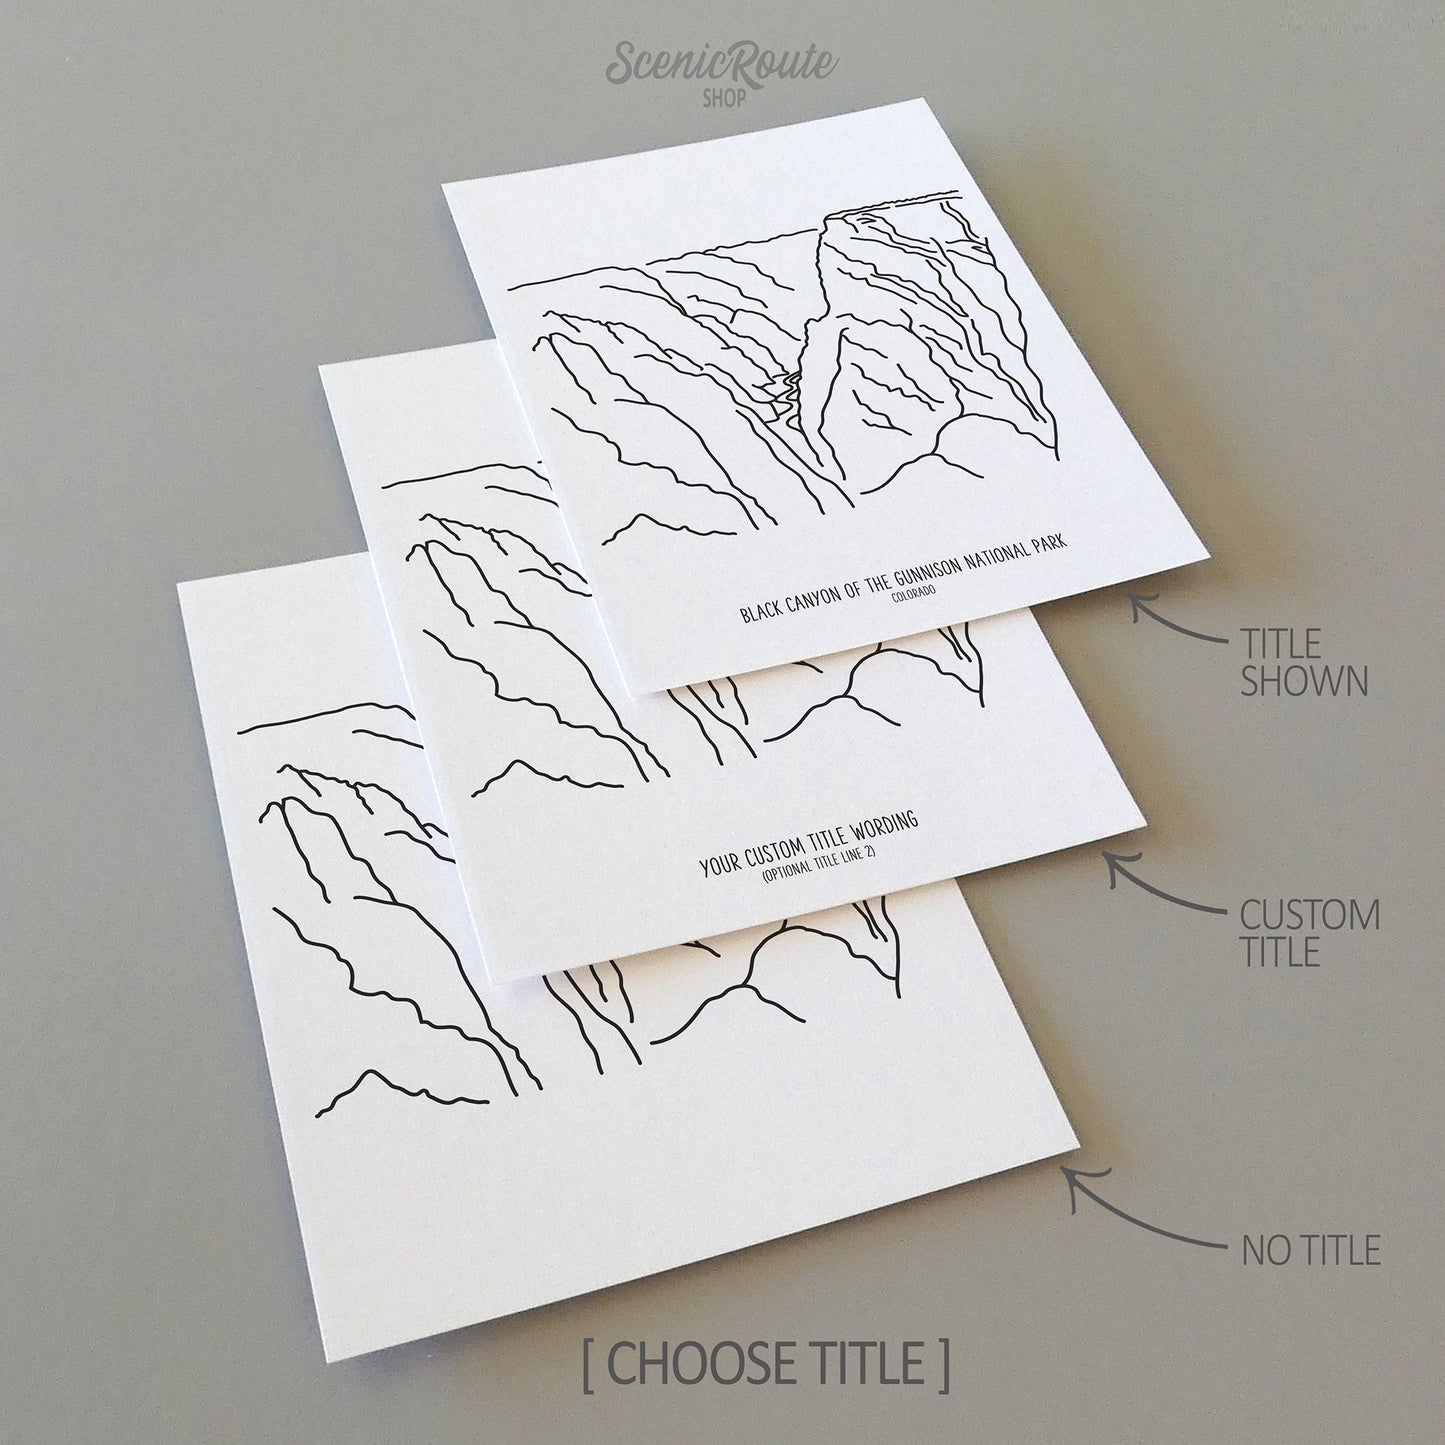 Three line art drawings of Black Canyon of the Gunnison National Park on white linen paper with a gray background. The pieces are shown with title options that can be chosen and personalized.